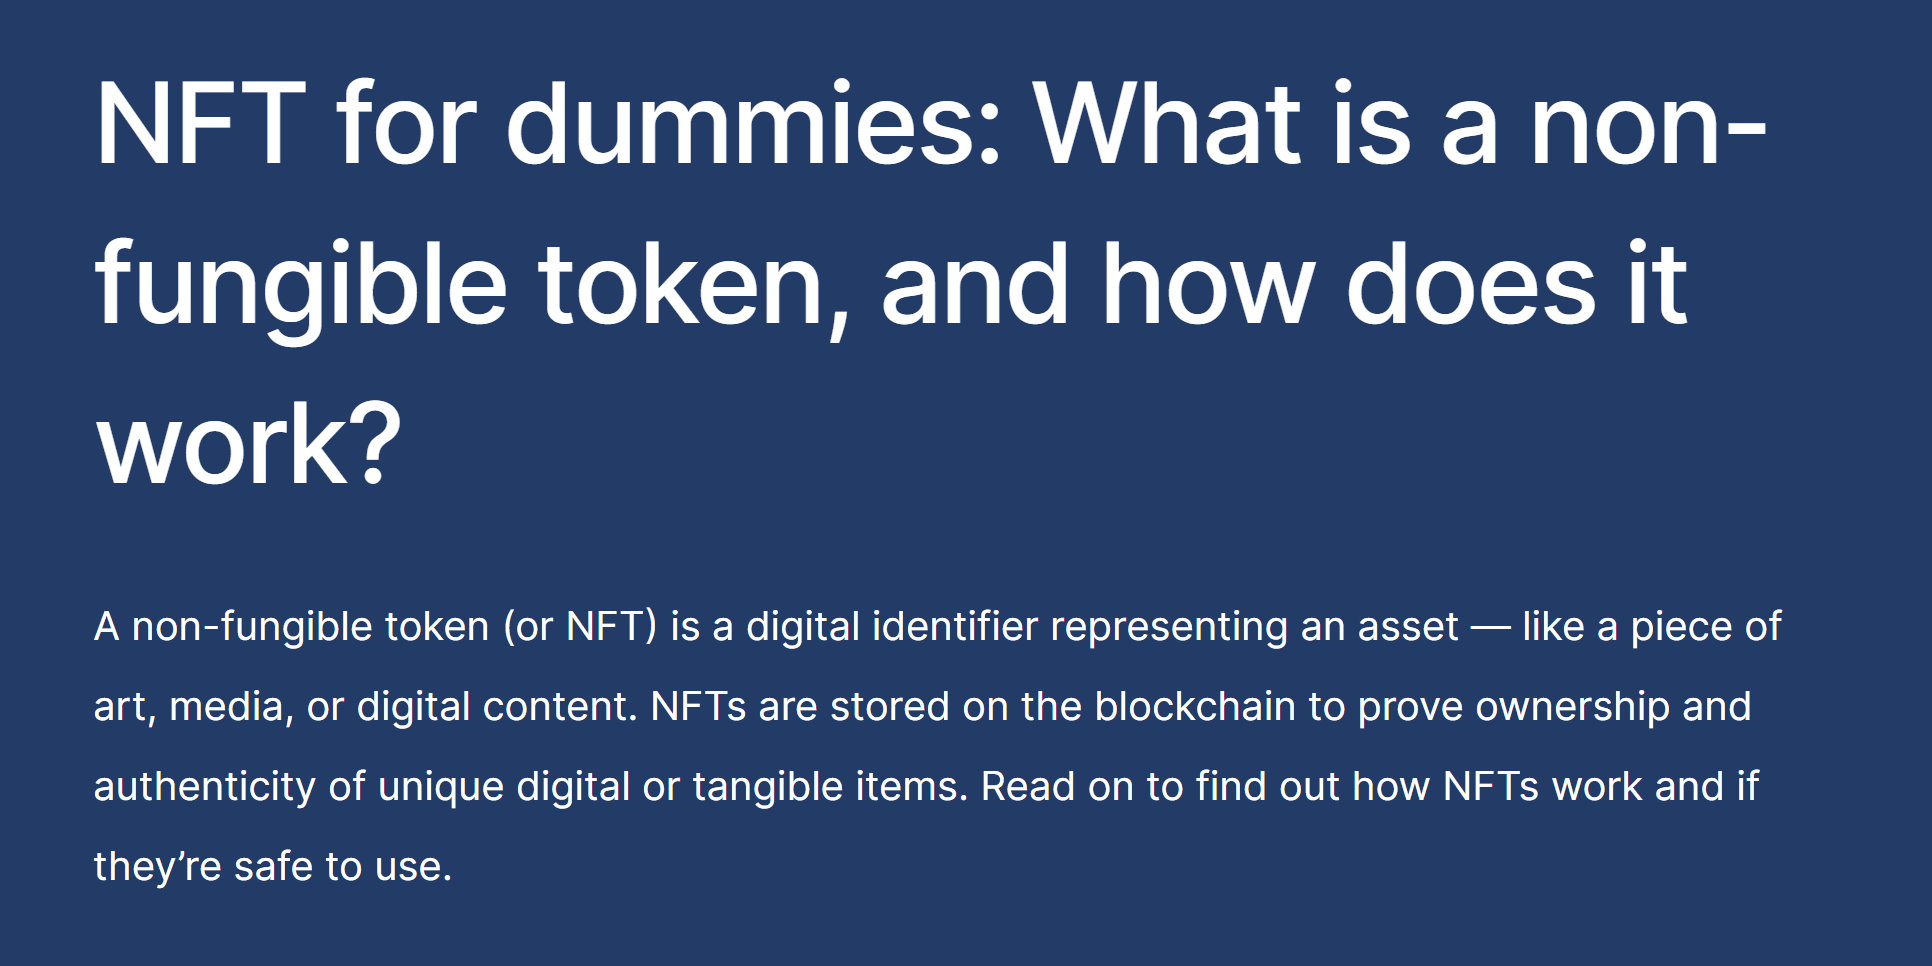 NFT for dummies: What is a non-fungible token, and how does it work